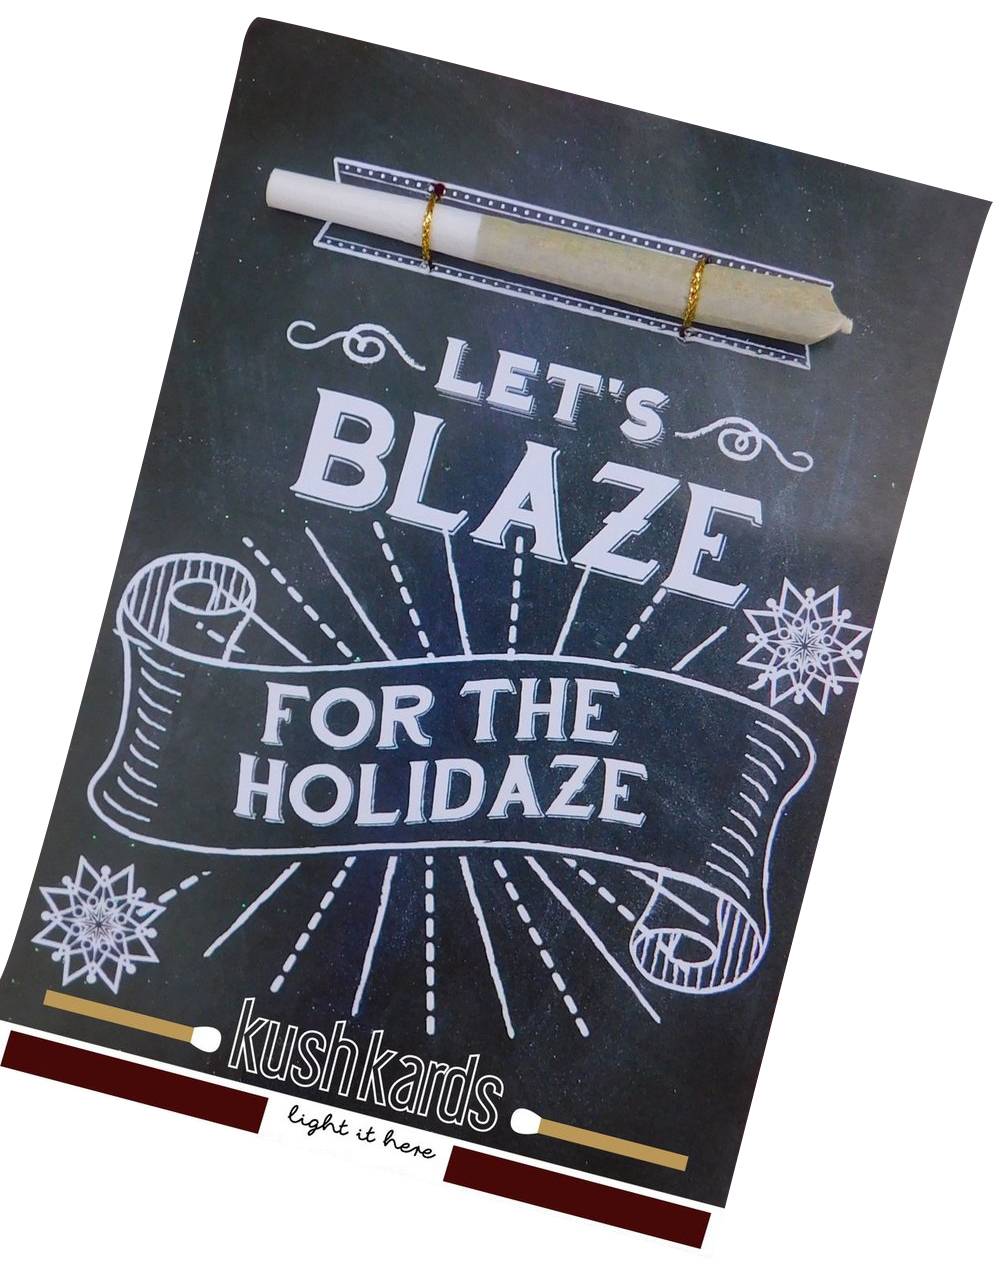 KUSHKARDS JUST ADD A PRE-ROLL GREETING CARD - LET'S BLAZE FOR THE HOLIDAZE